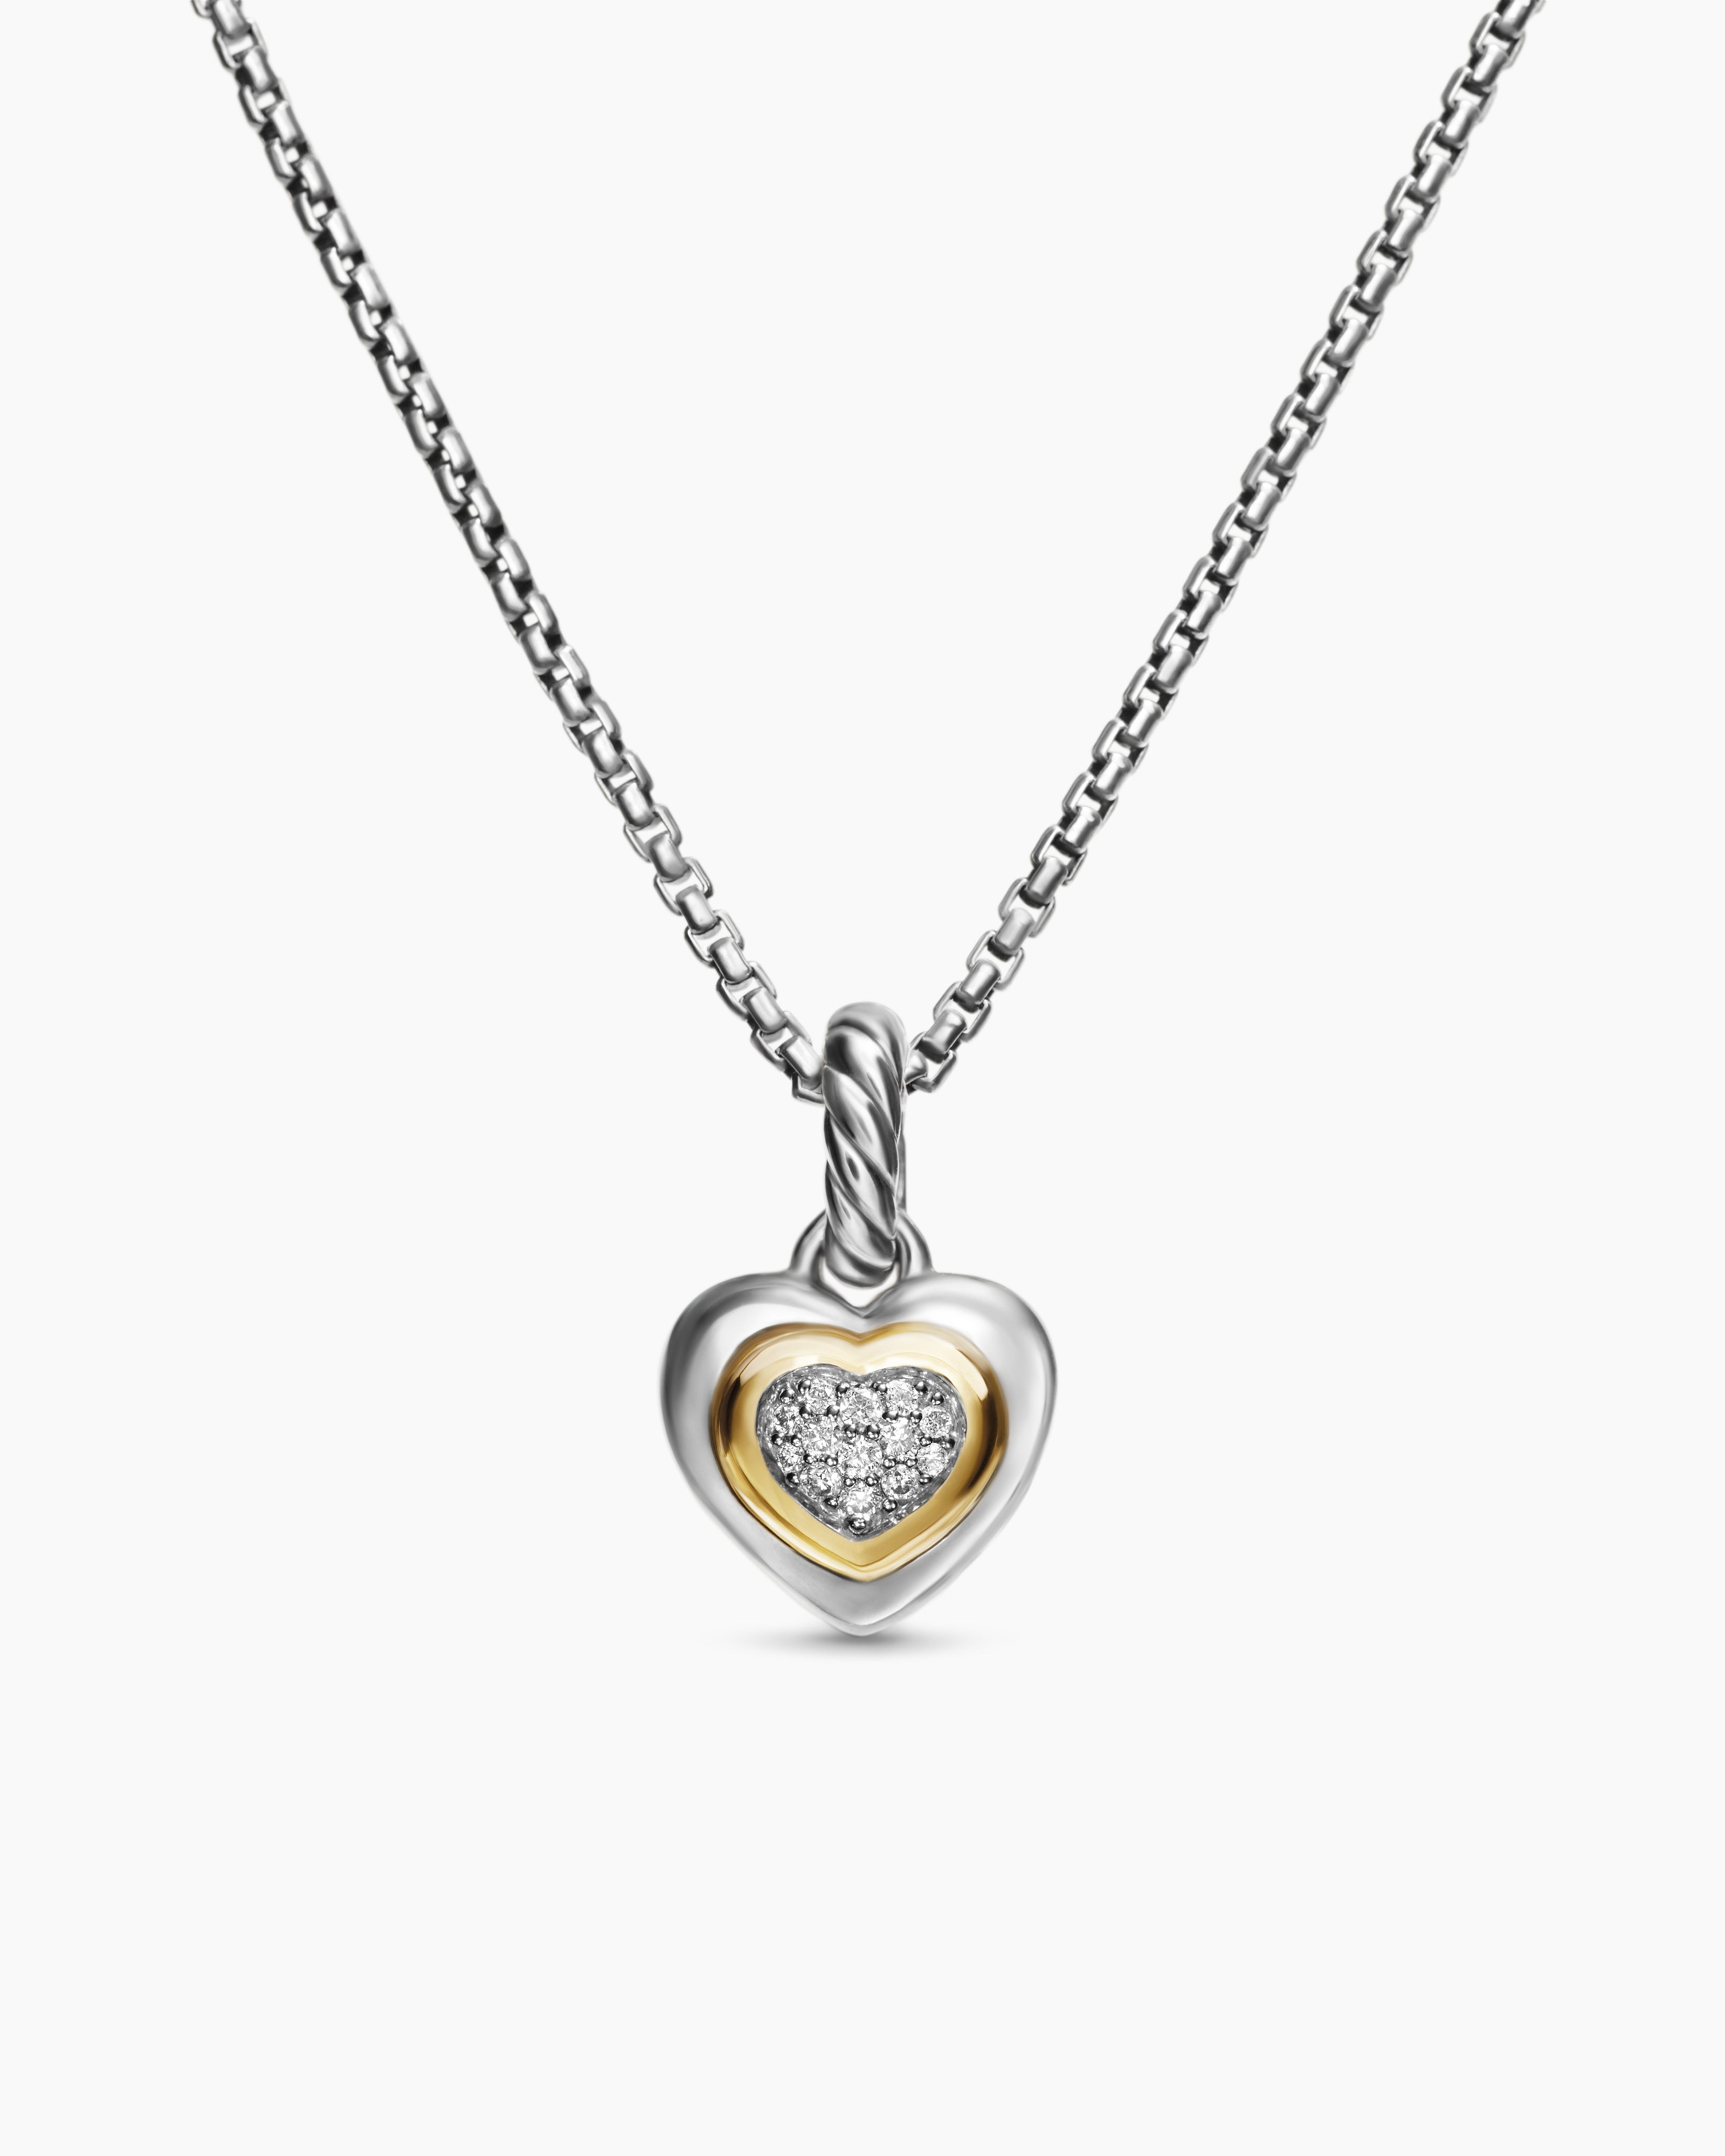 CLARA 925 Sterling Silver Curly Heart Pendant Chain Necklace Rhodium P